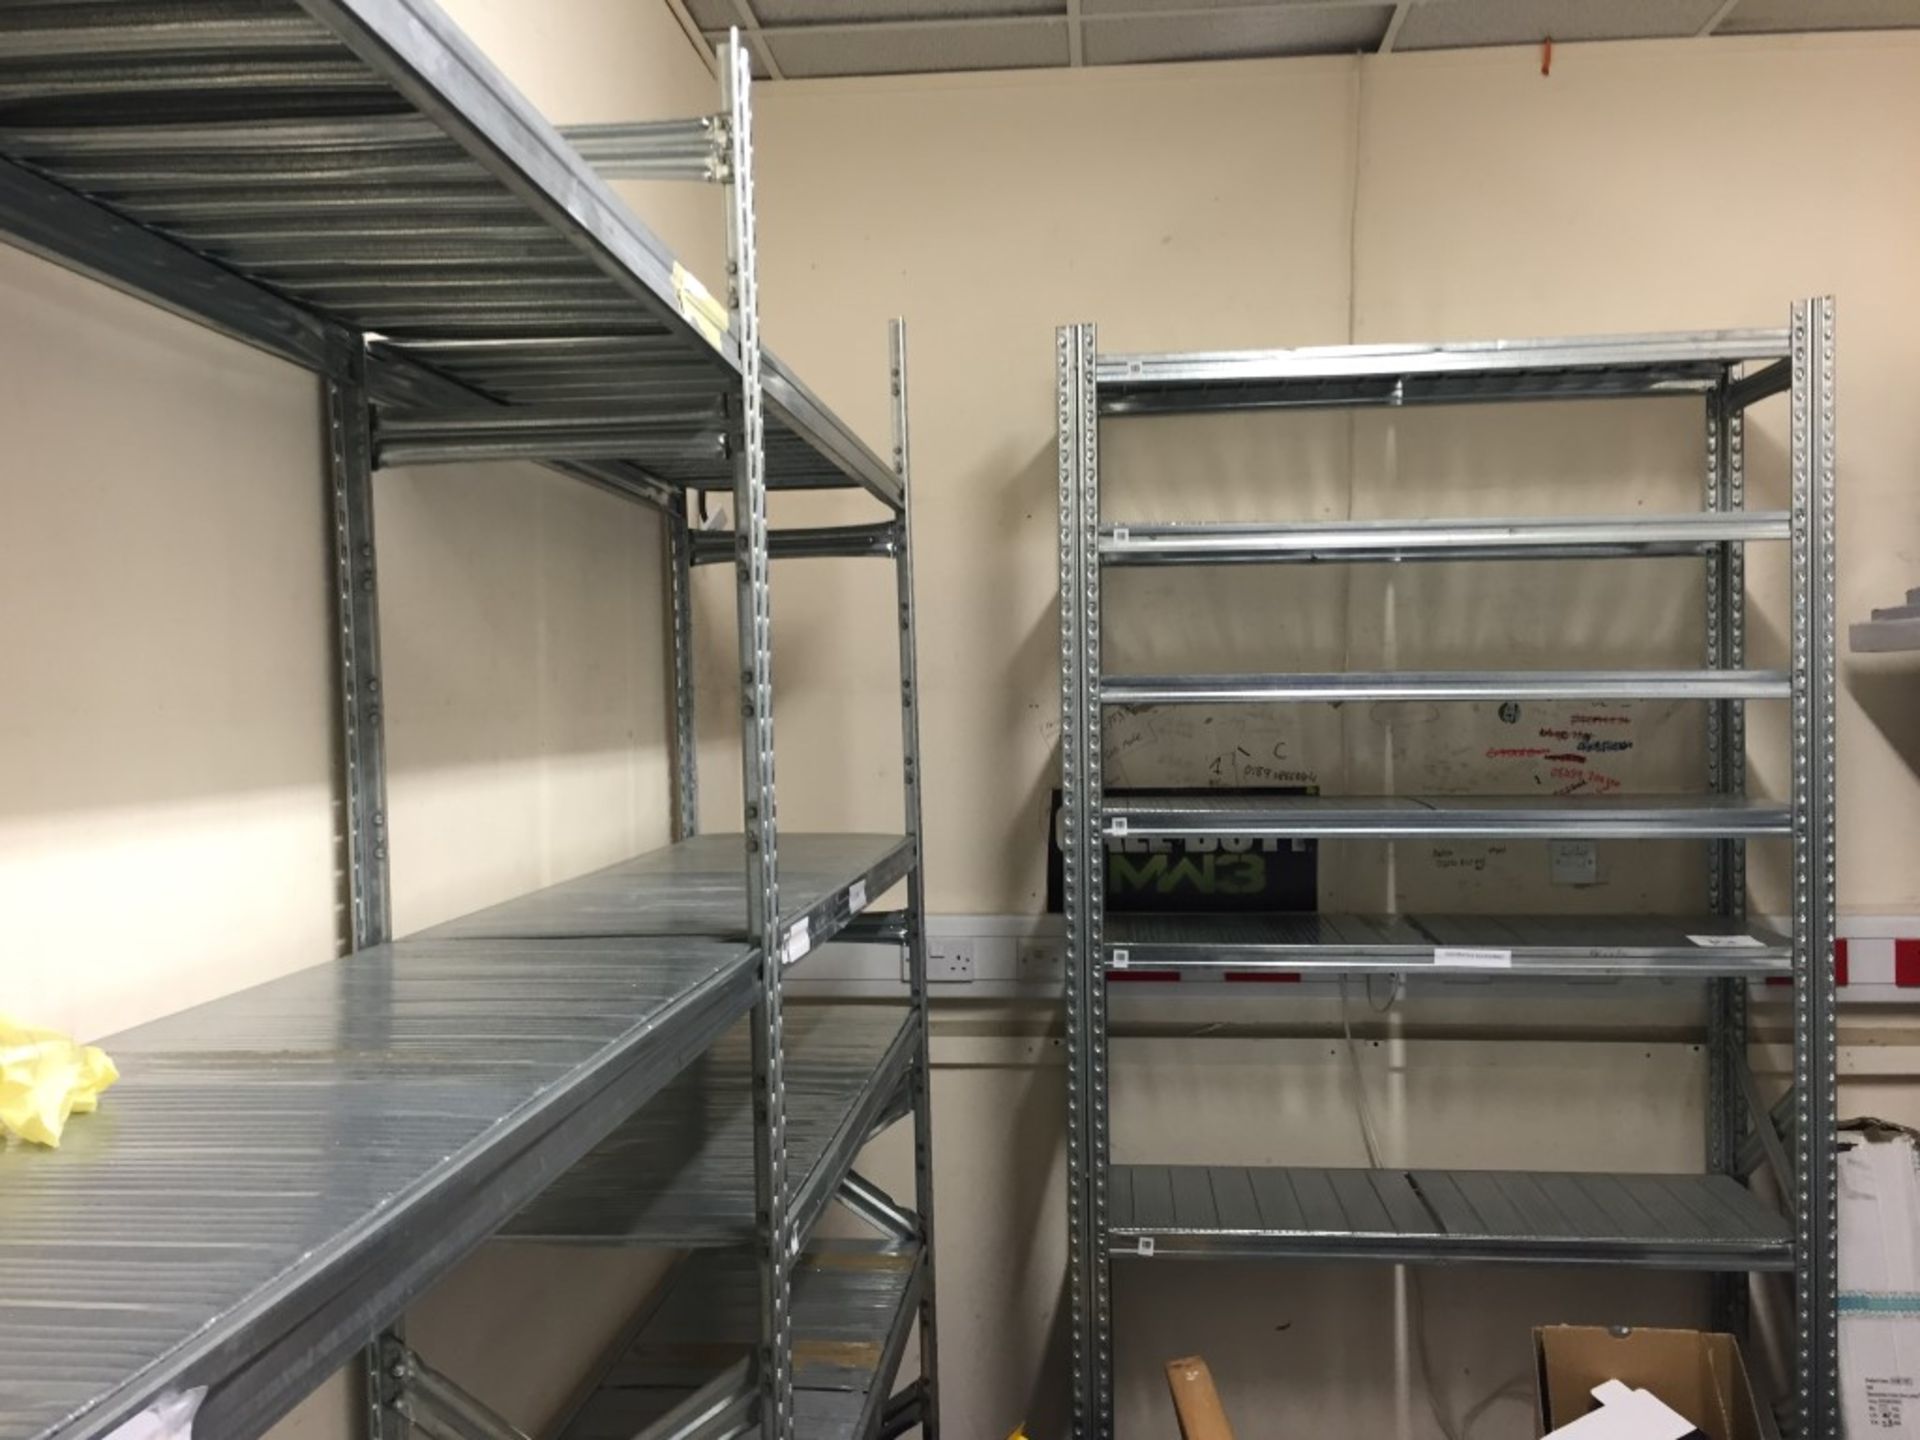 Job Lot of Italian made Metal Storage Racking with practical light weight shelving - Ideal for all